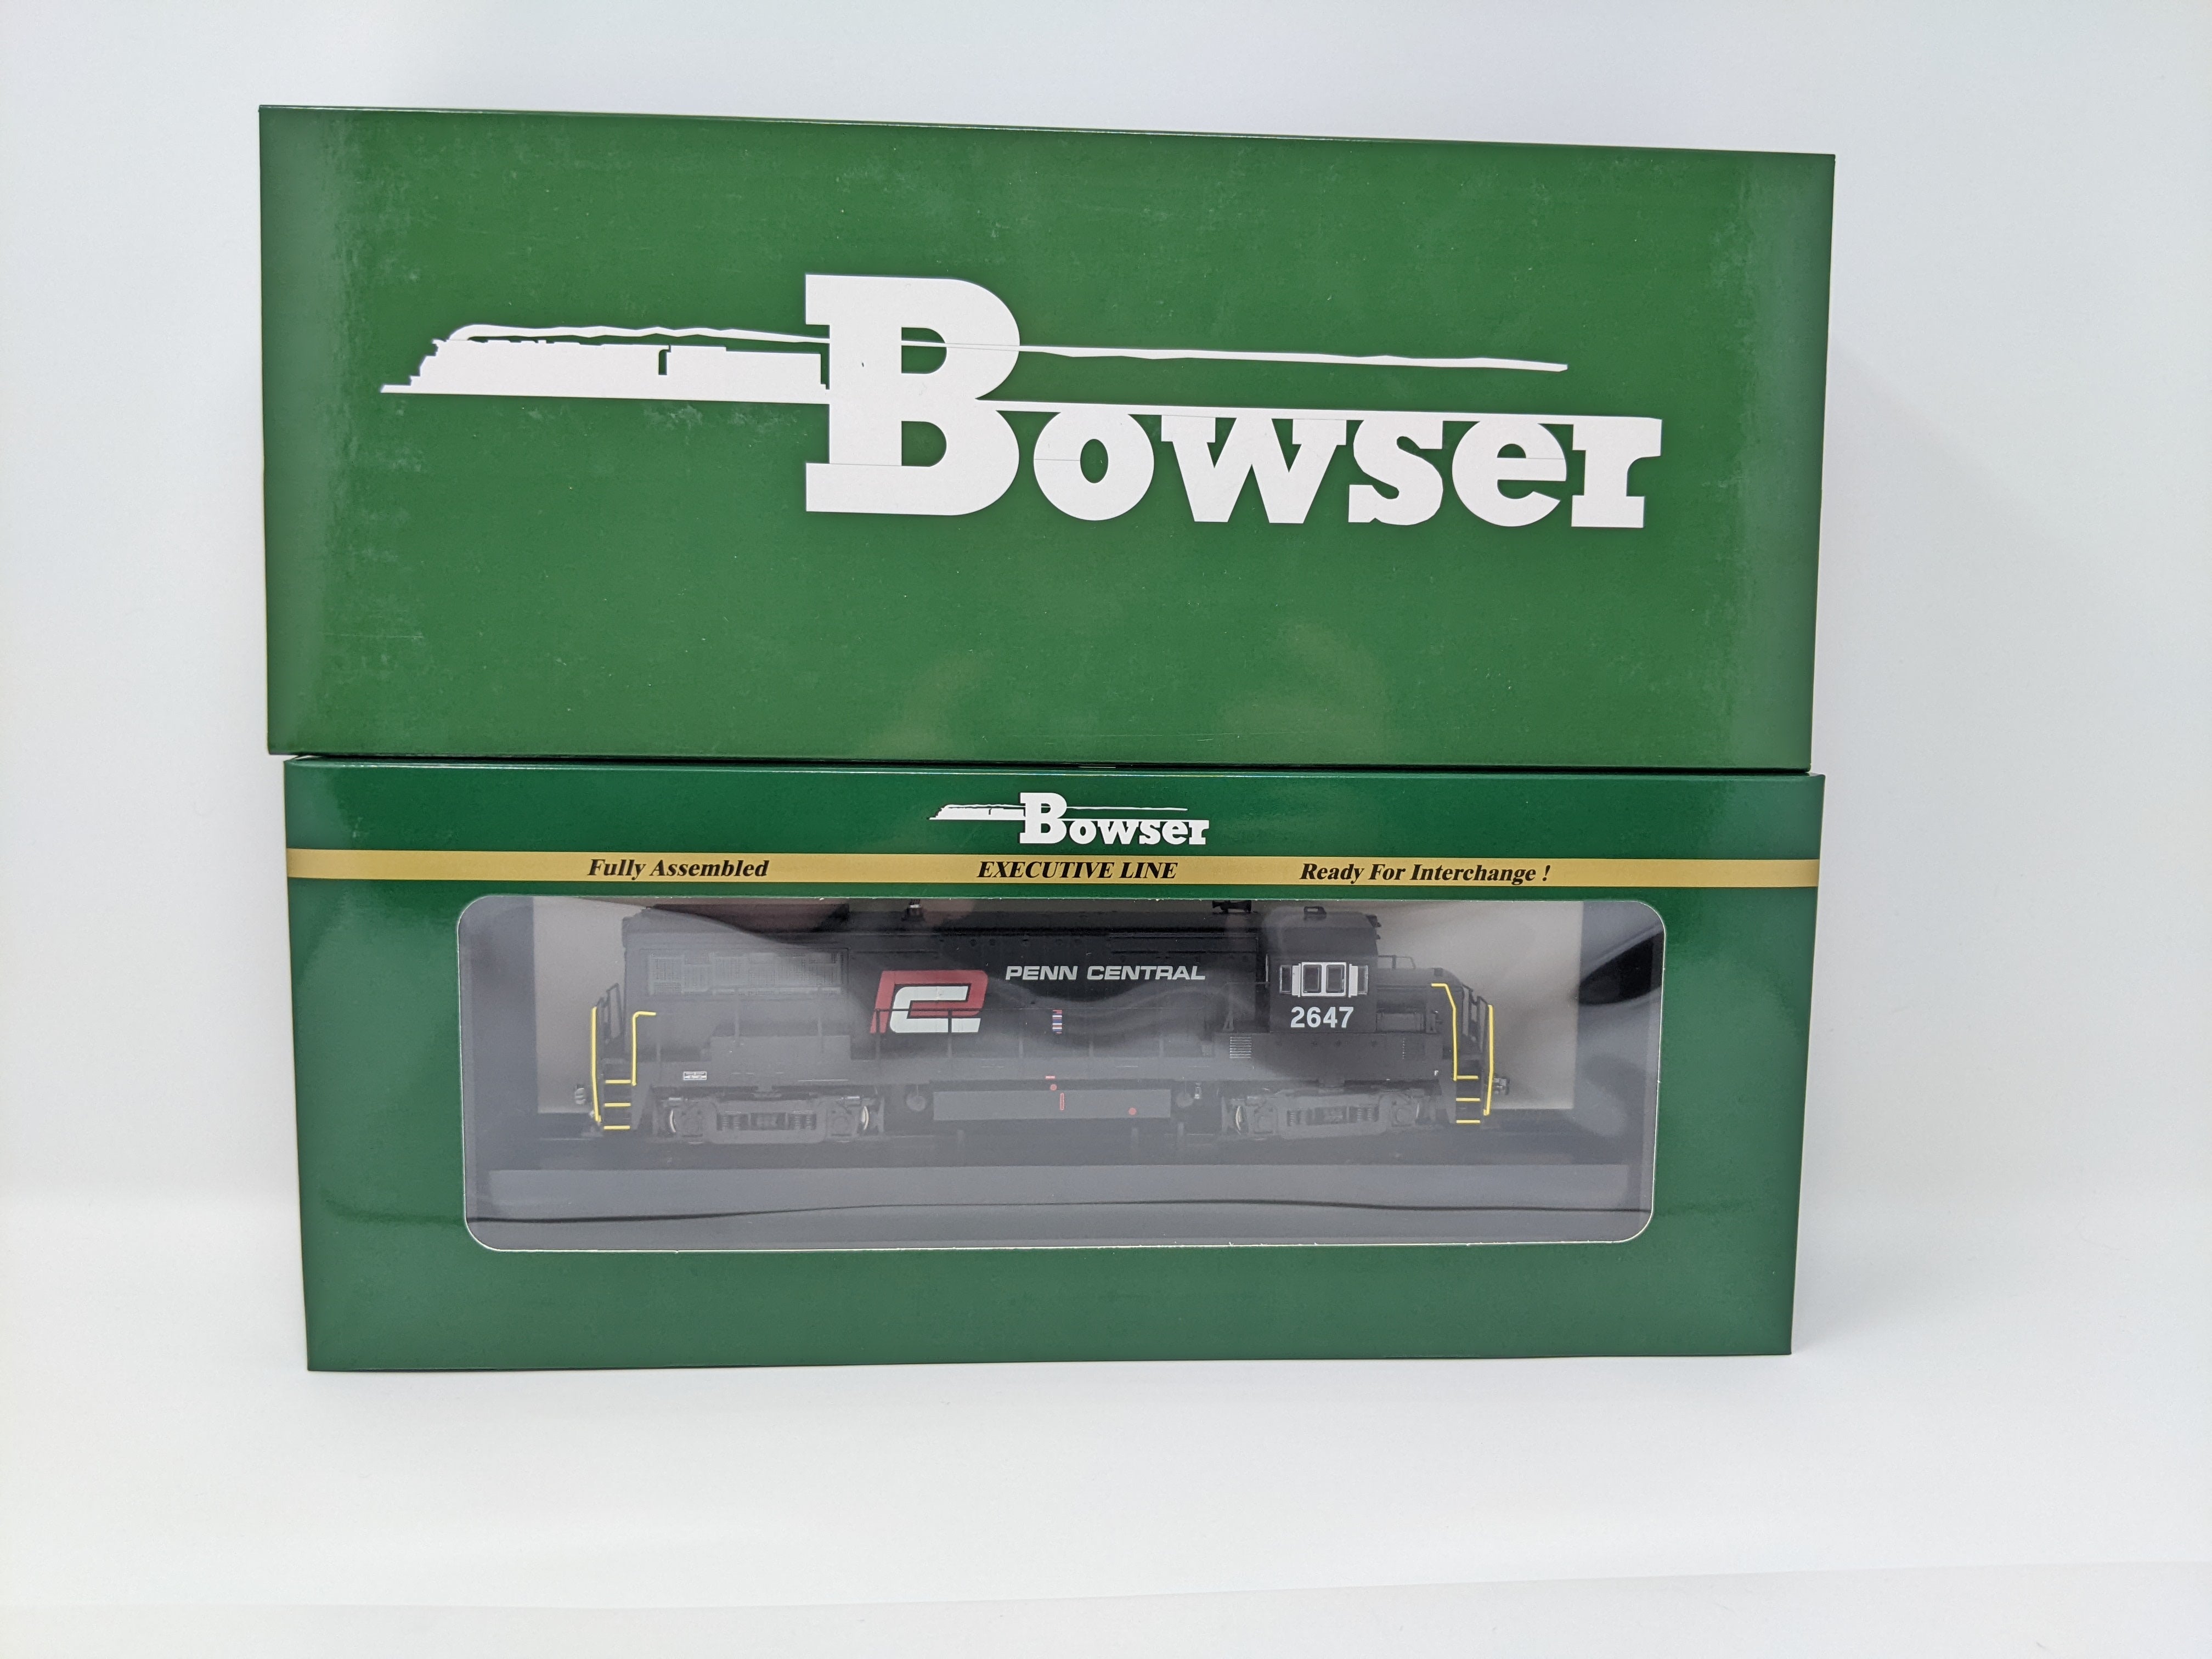 Bowser 25158 HO Scale, U-25B Diesel Locomotive, Penn Central #2647, Phase III Red P (DCC LokSound 5)